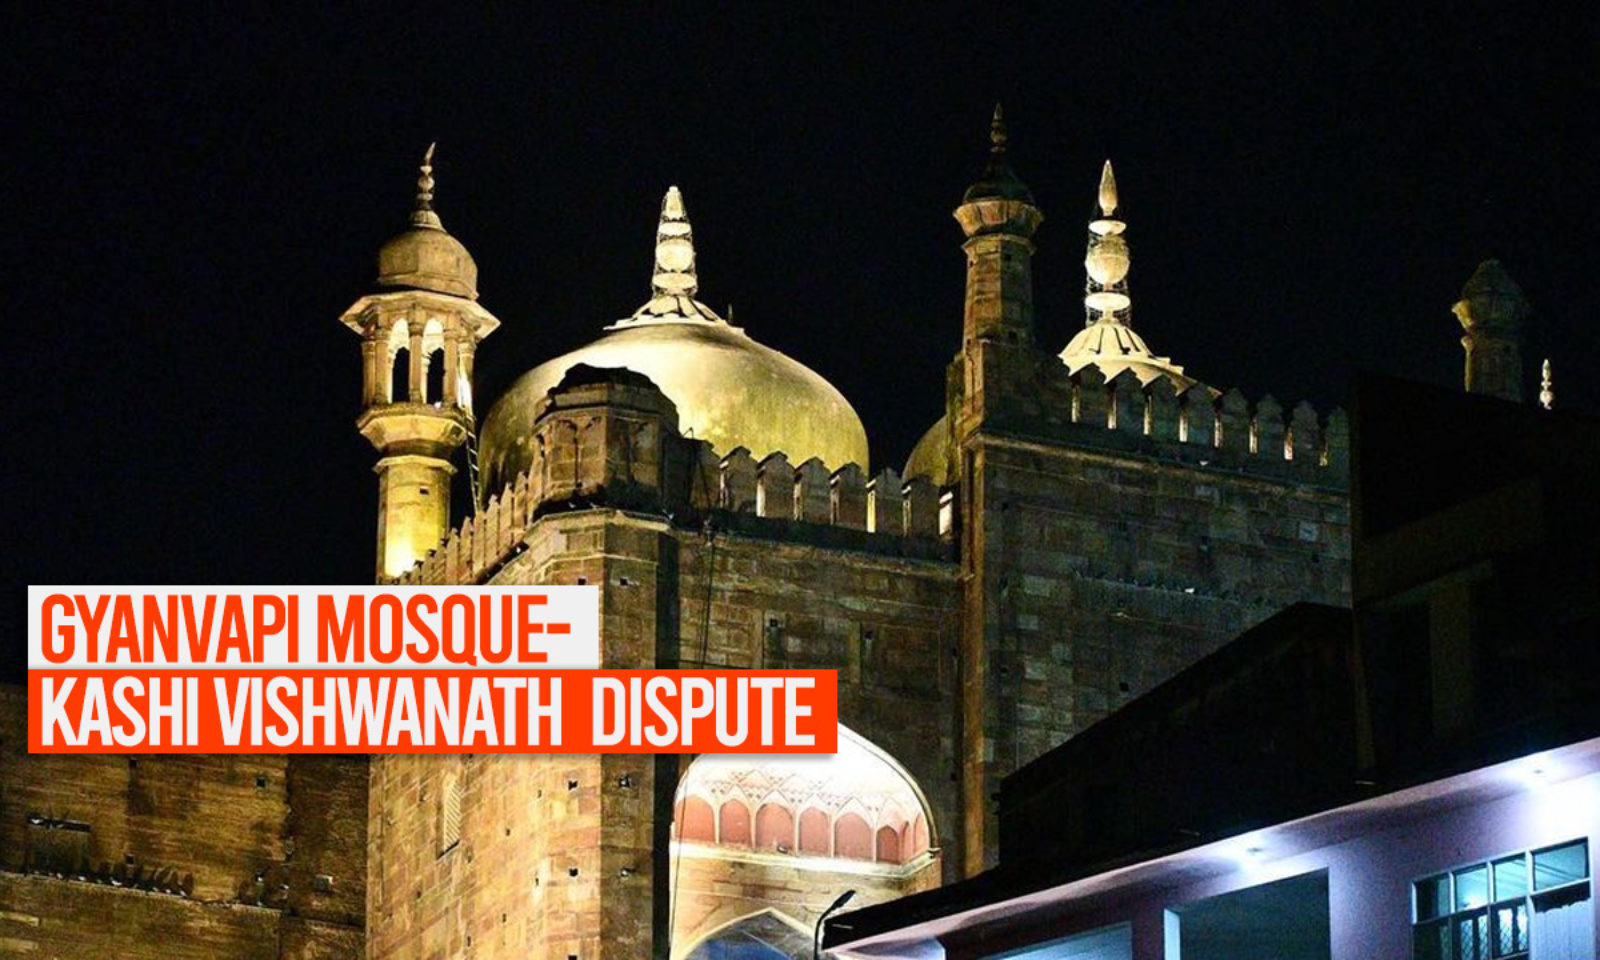 A Varanasi Court today DISMISSED an application of the Anjuman Masjid Committee under Order 7 Rule 11 CPC - Asiana Times